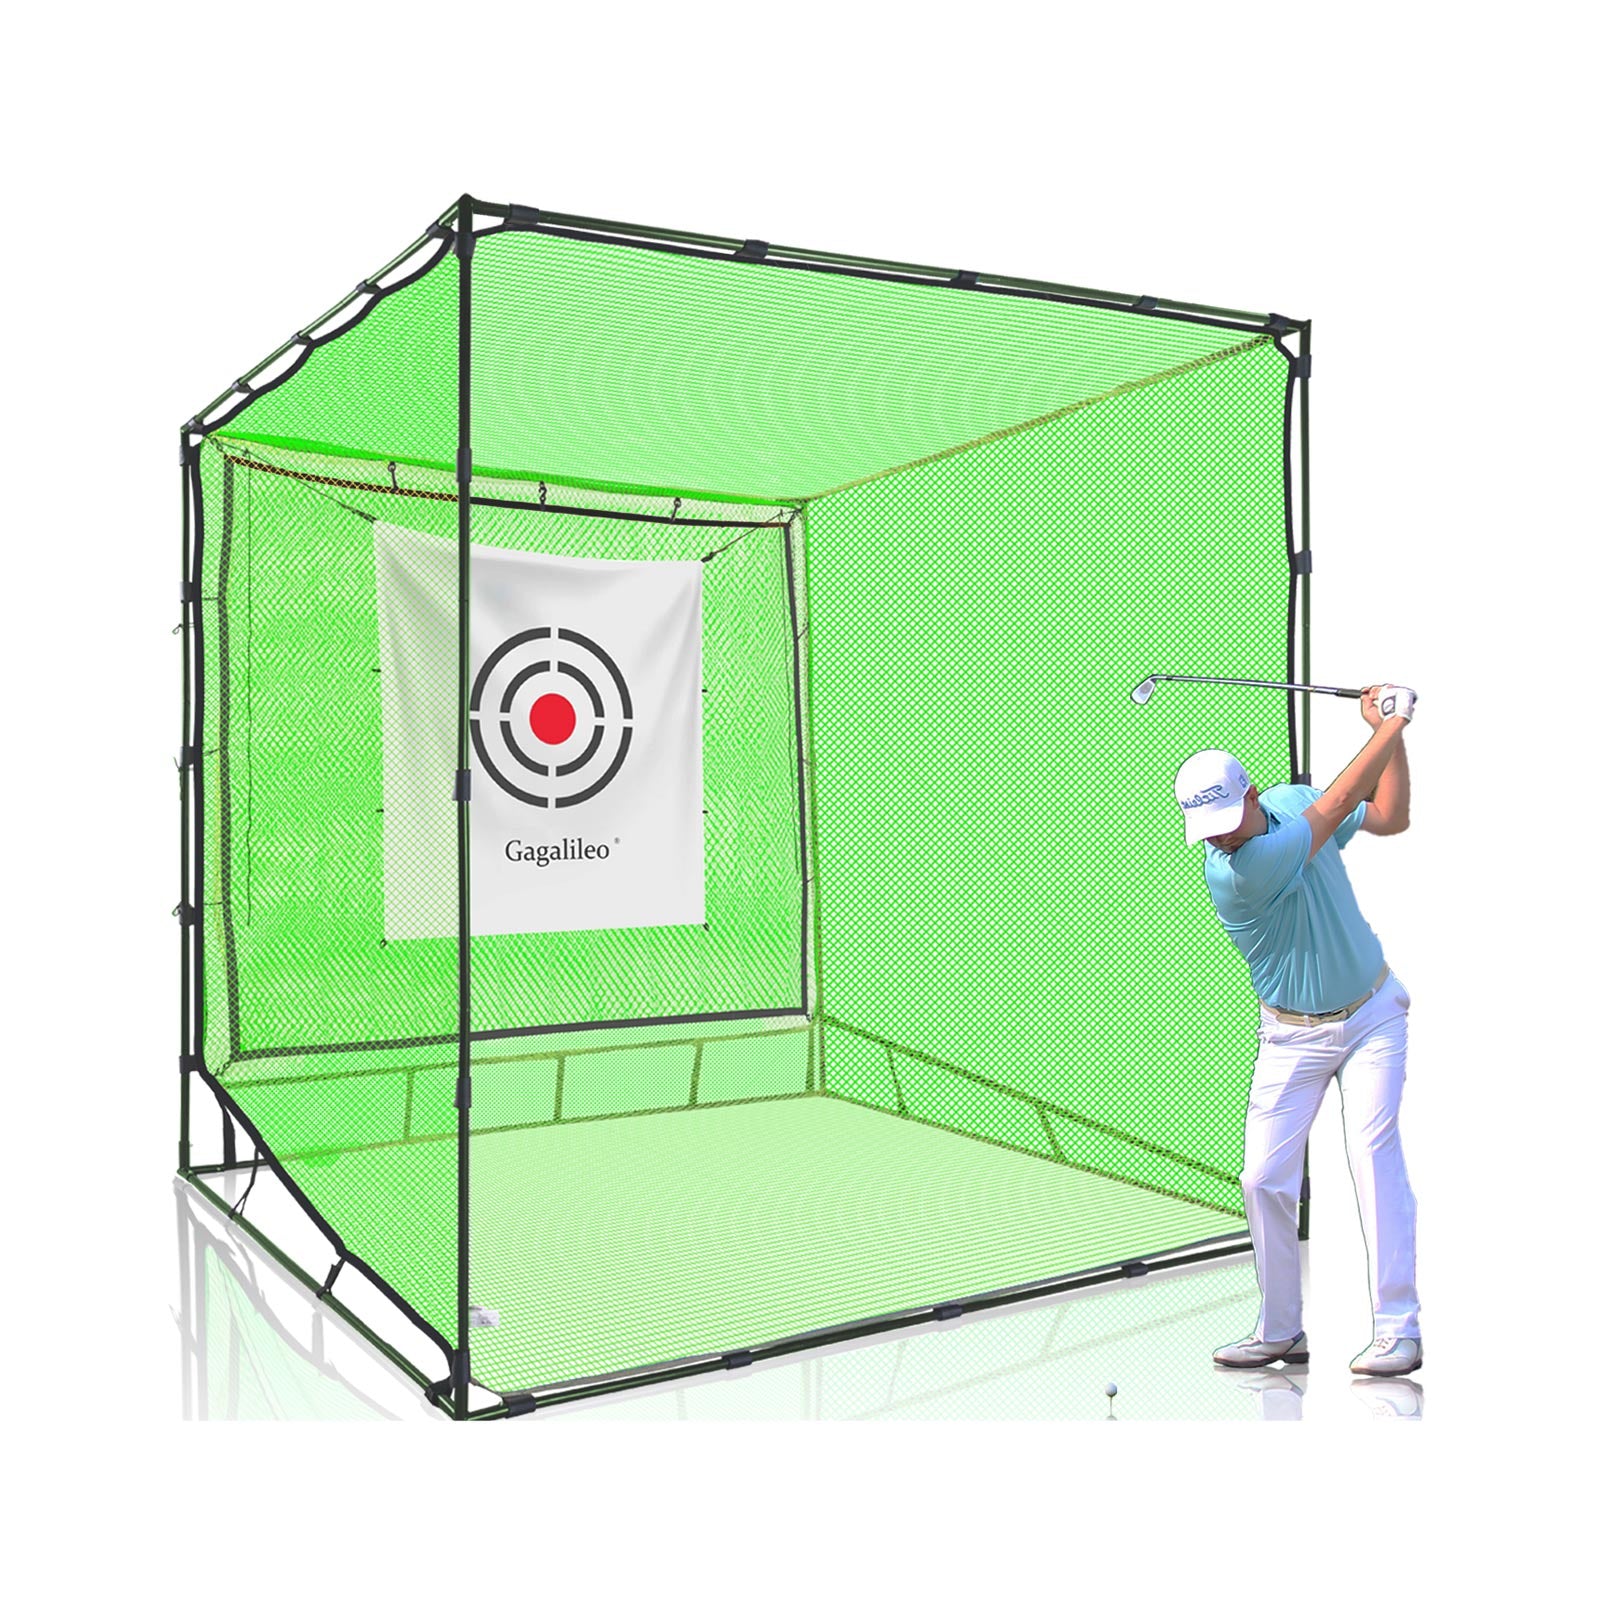 Gagalileo Golf Hitting Net Cage/High Impact Double Backstop Net/10ft X10ft X10ft